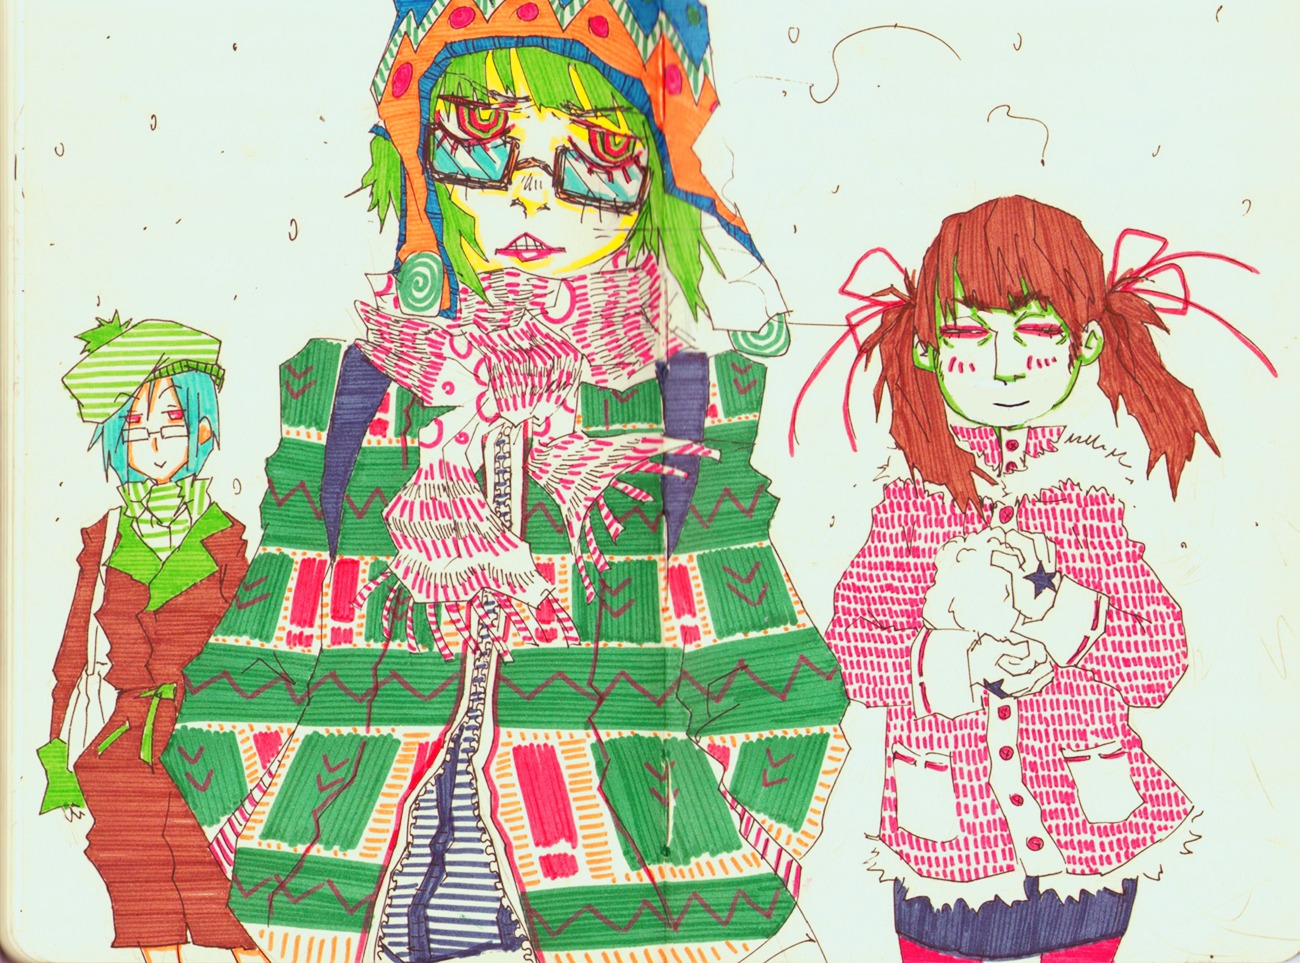 black_hole-chan blue_hair bomb-chan brown_hair glasses green_hair hat hydrogen_bomb-chan long_hair multiple_girls red_eyes scarf stylish traditional_media twintails winter_clothes